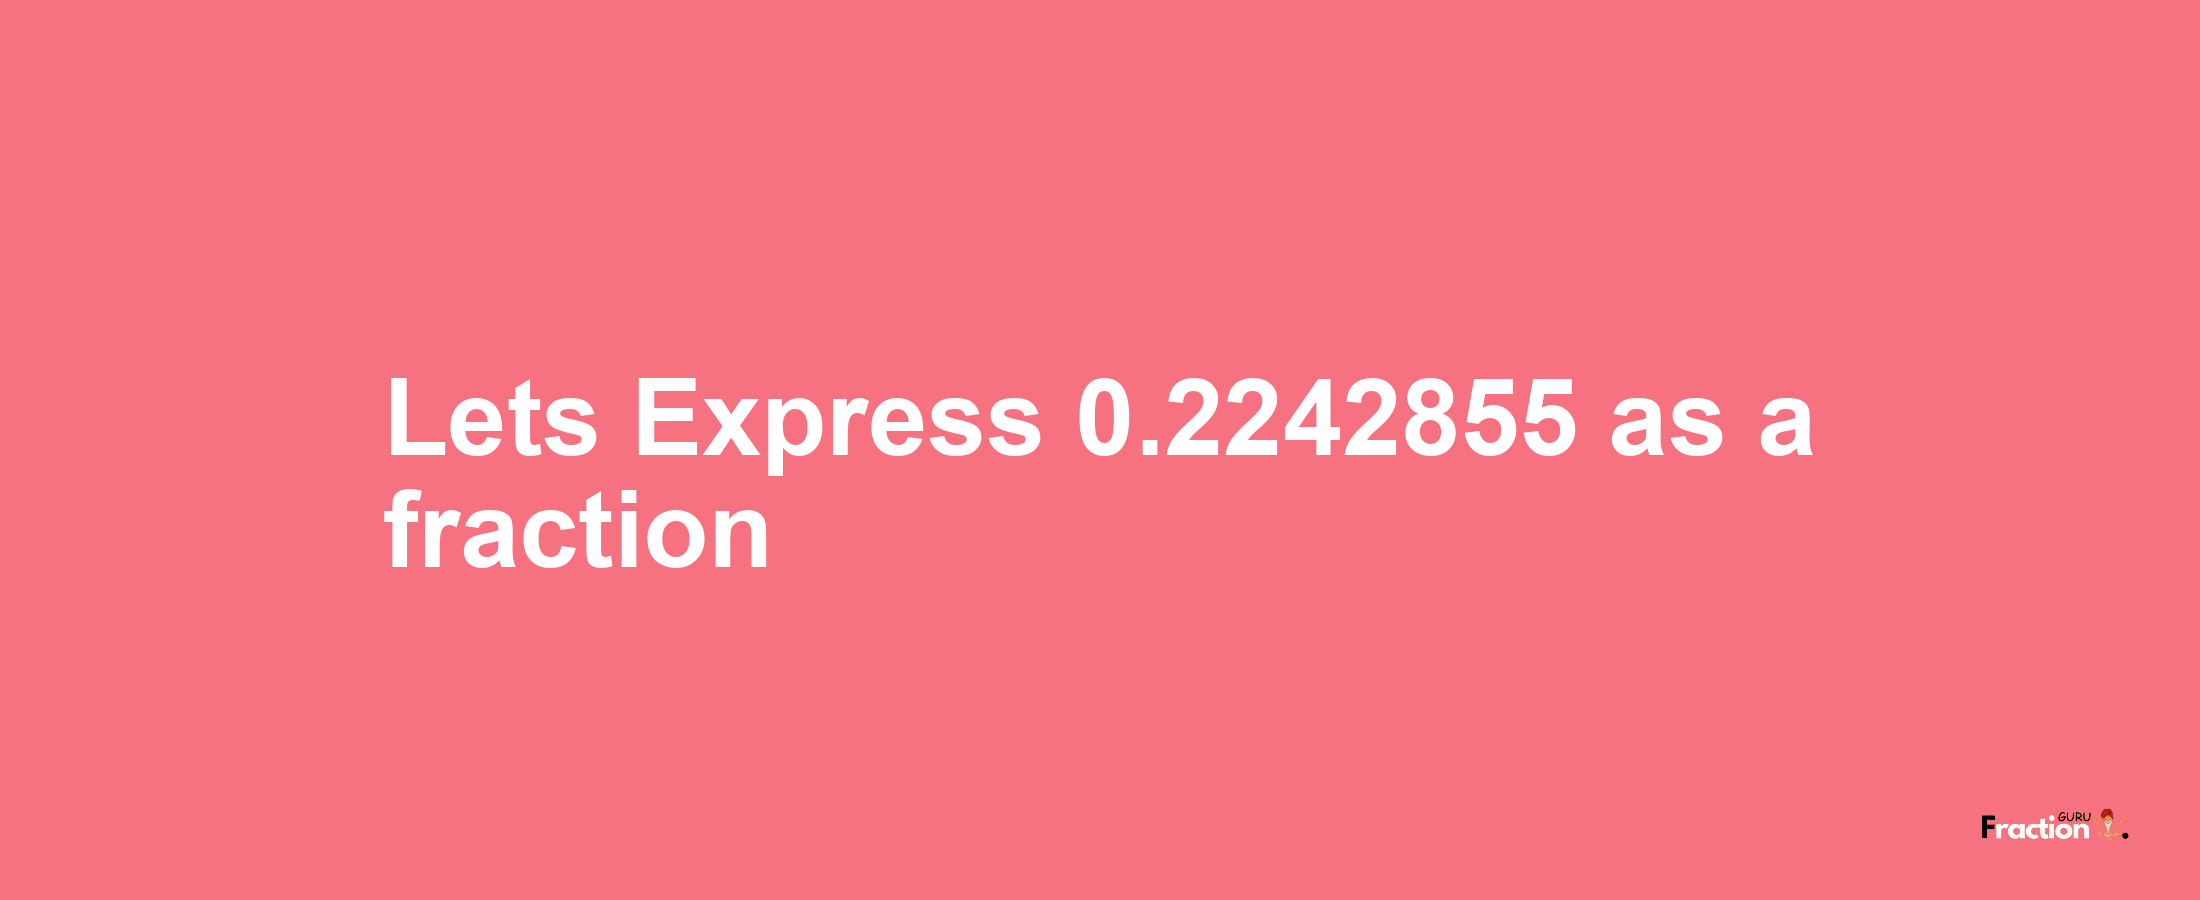 Lets Express 0.2242855 as afraction